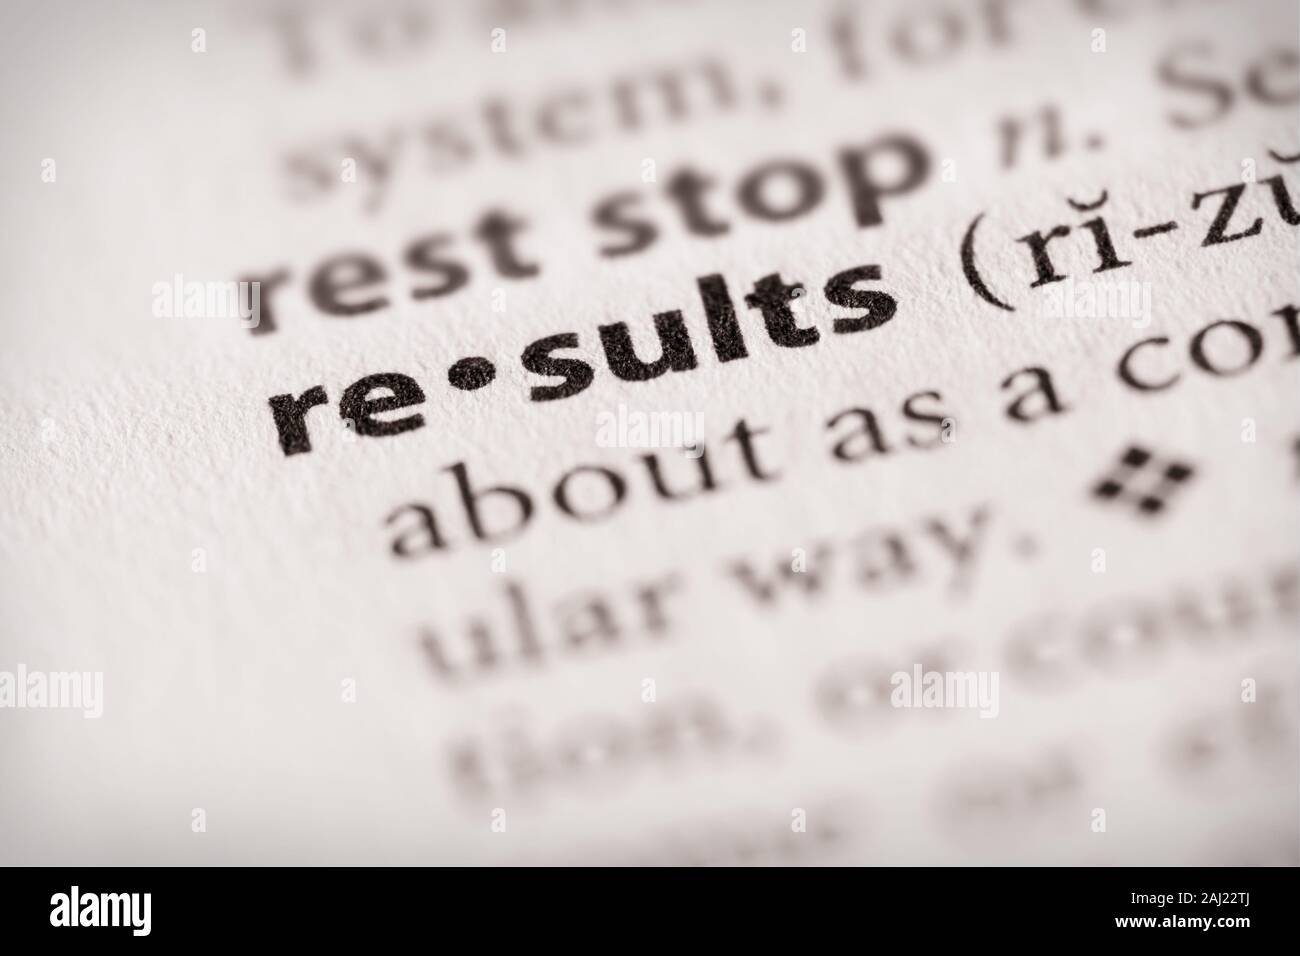 Selective focus on the word “results”. Many more word photos in my portfolio. Stock Photo